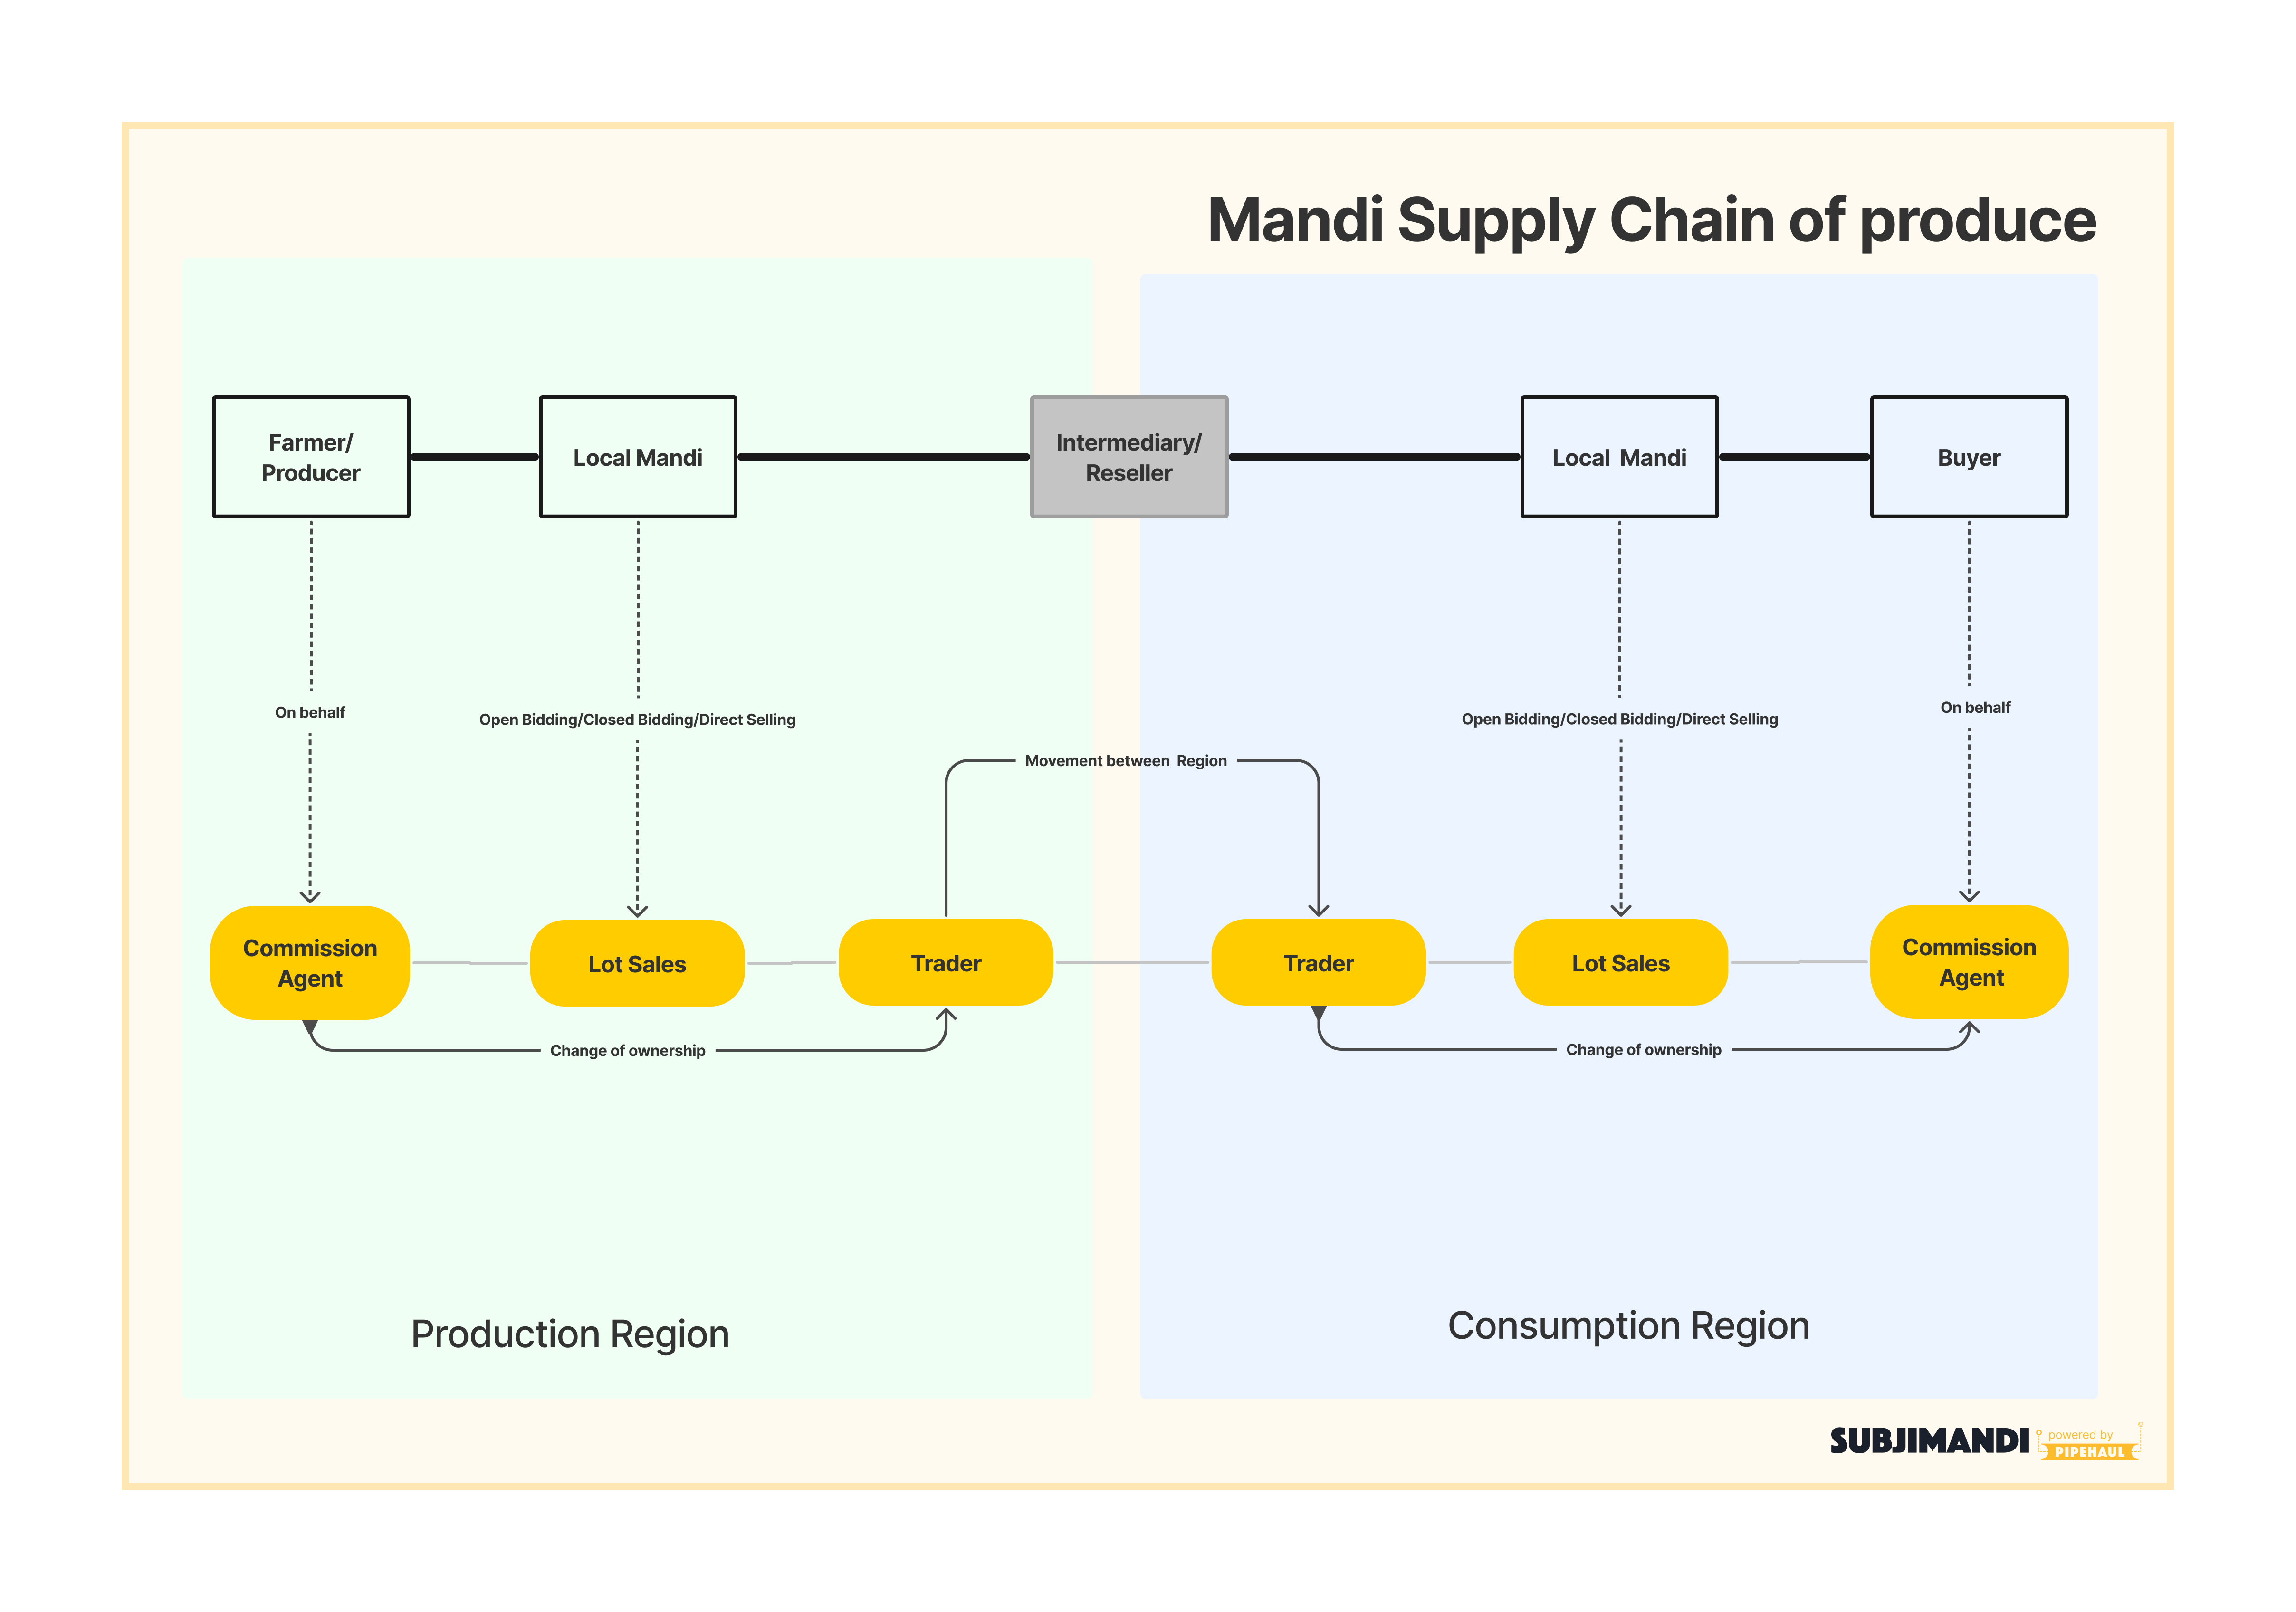 It depicts the entire process flow of mandi(s) network